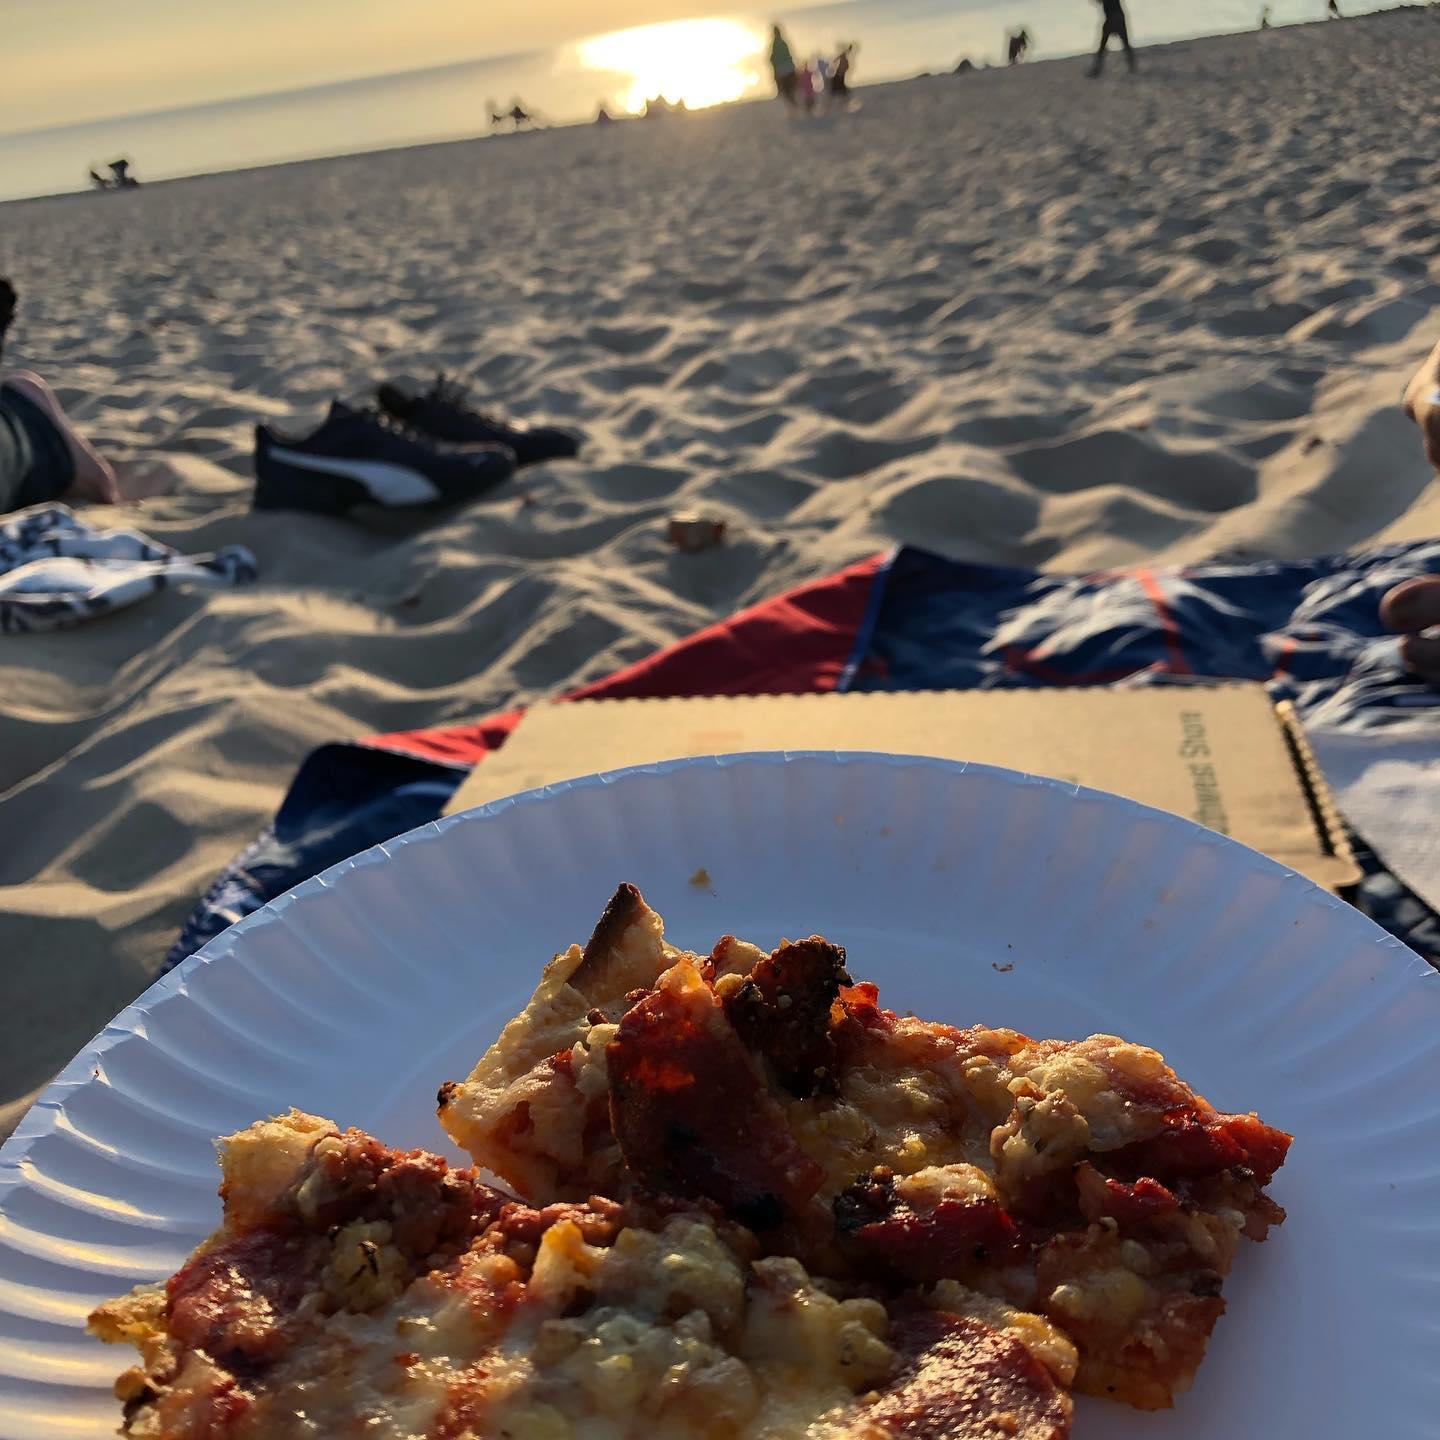 Pizza on a paper place on the beach